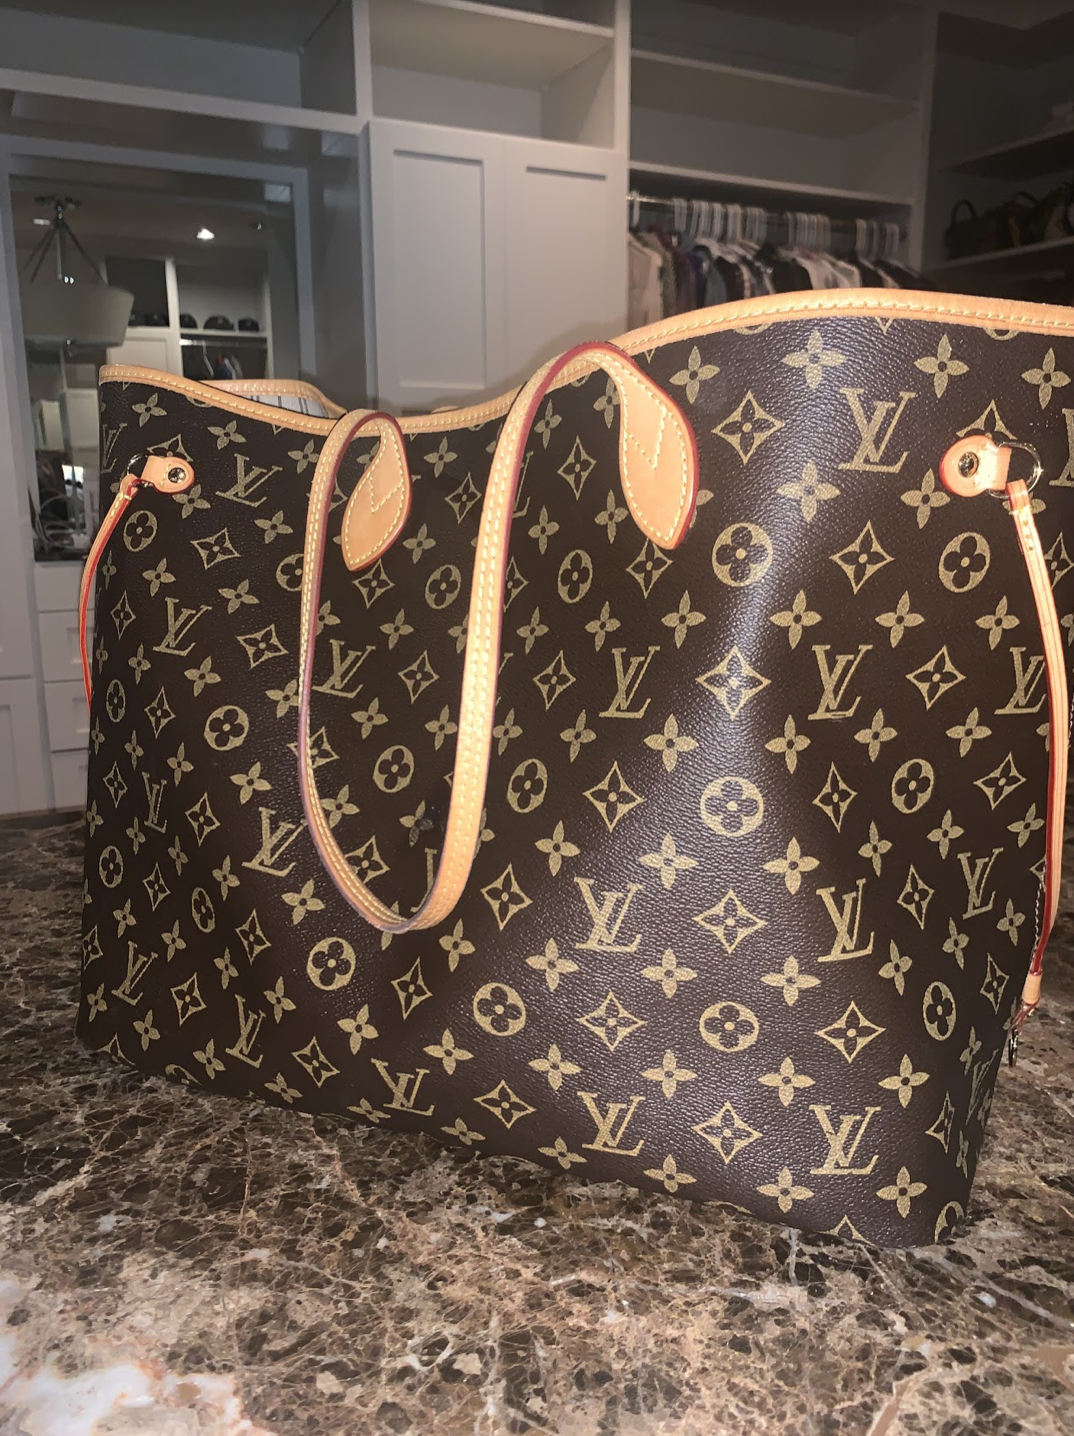 Do You Know Louis Vuitton burns all its unsold bags?